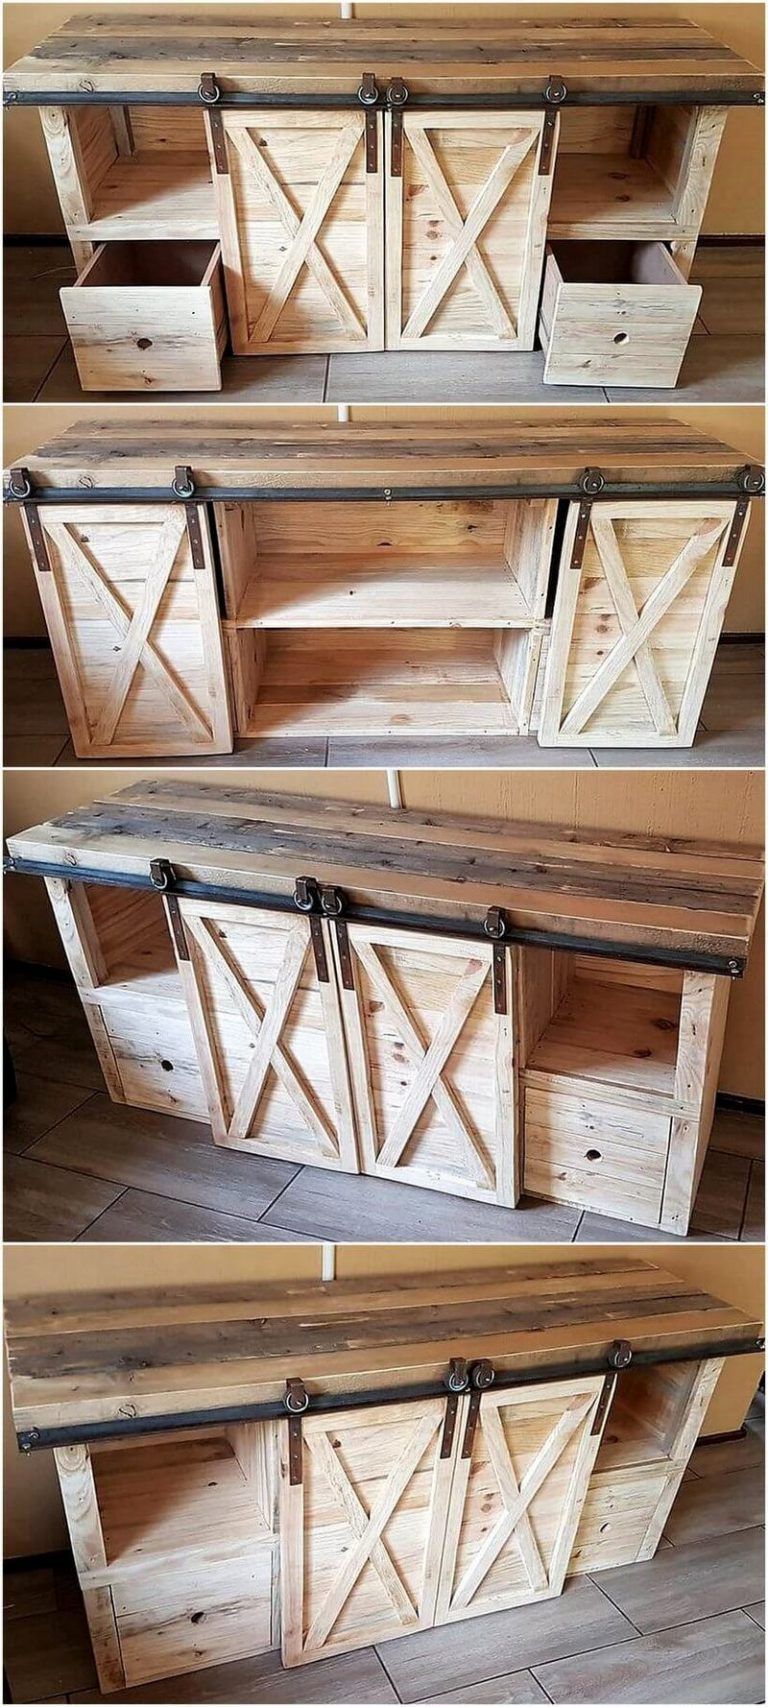 Rustic Pallet Wood Ideas and Projects | Rustic Home Decor and Design Ideas.